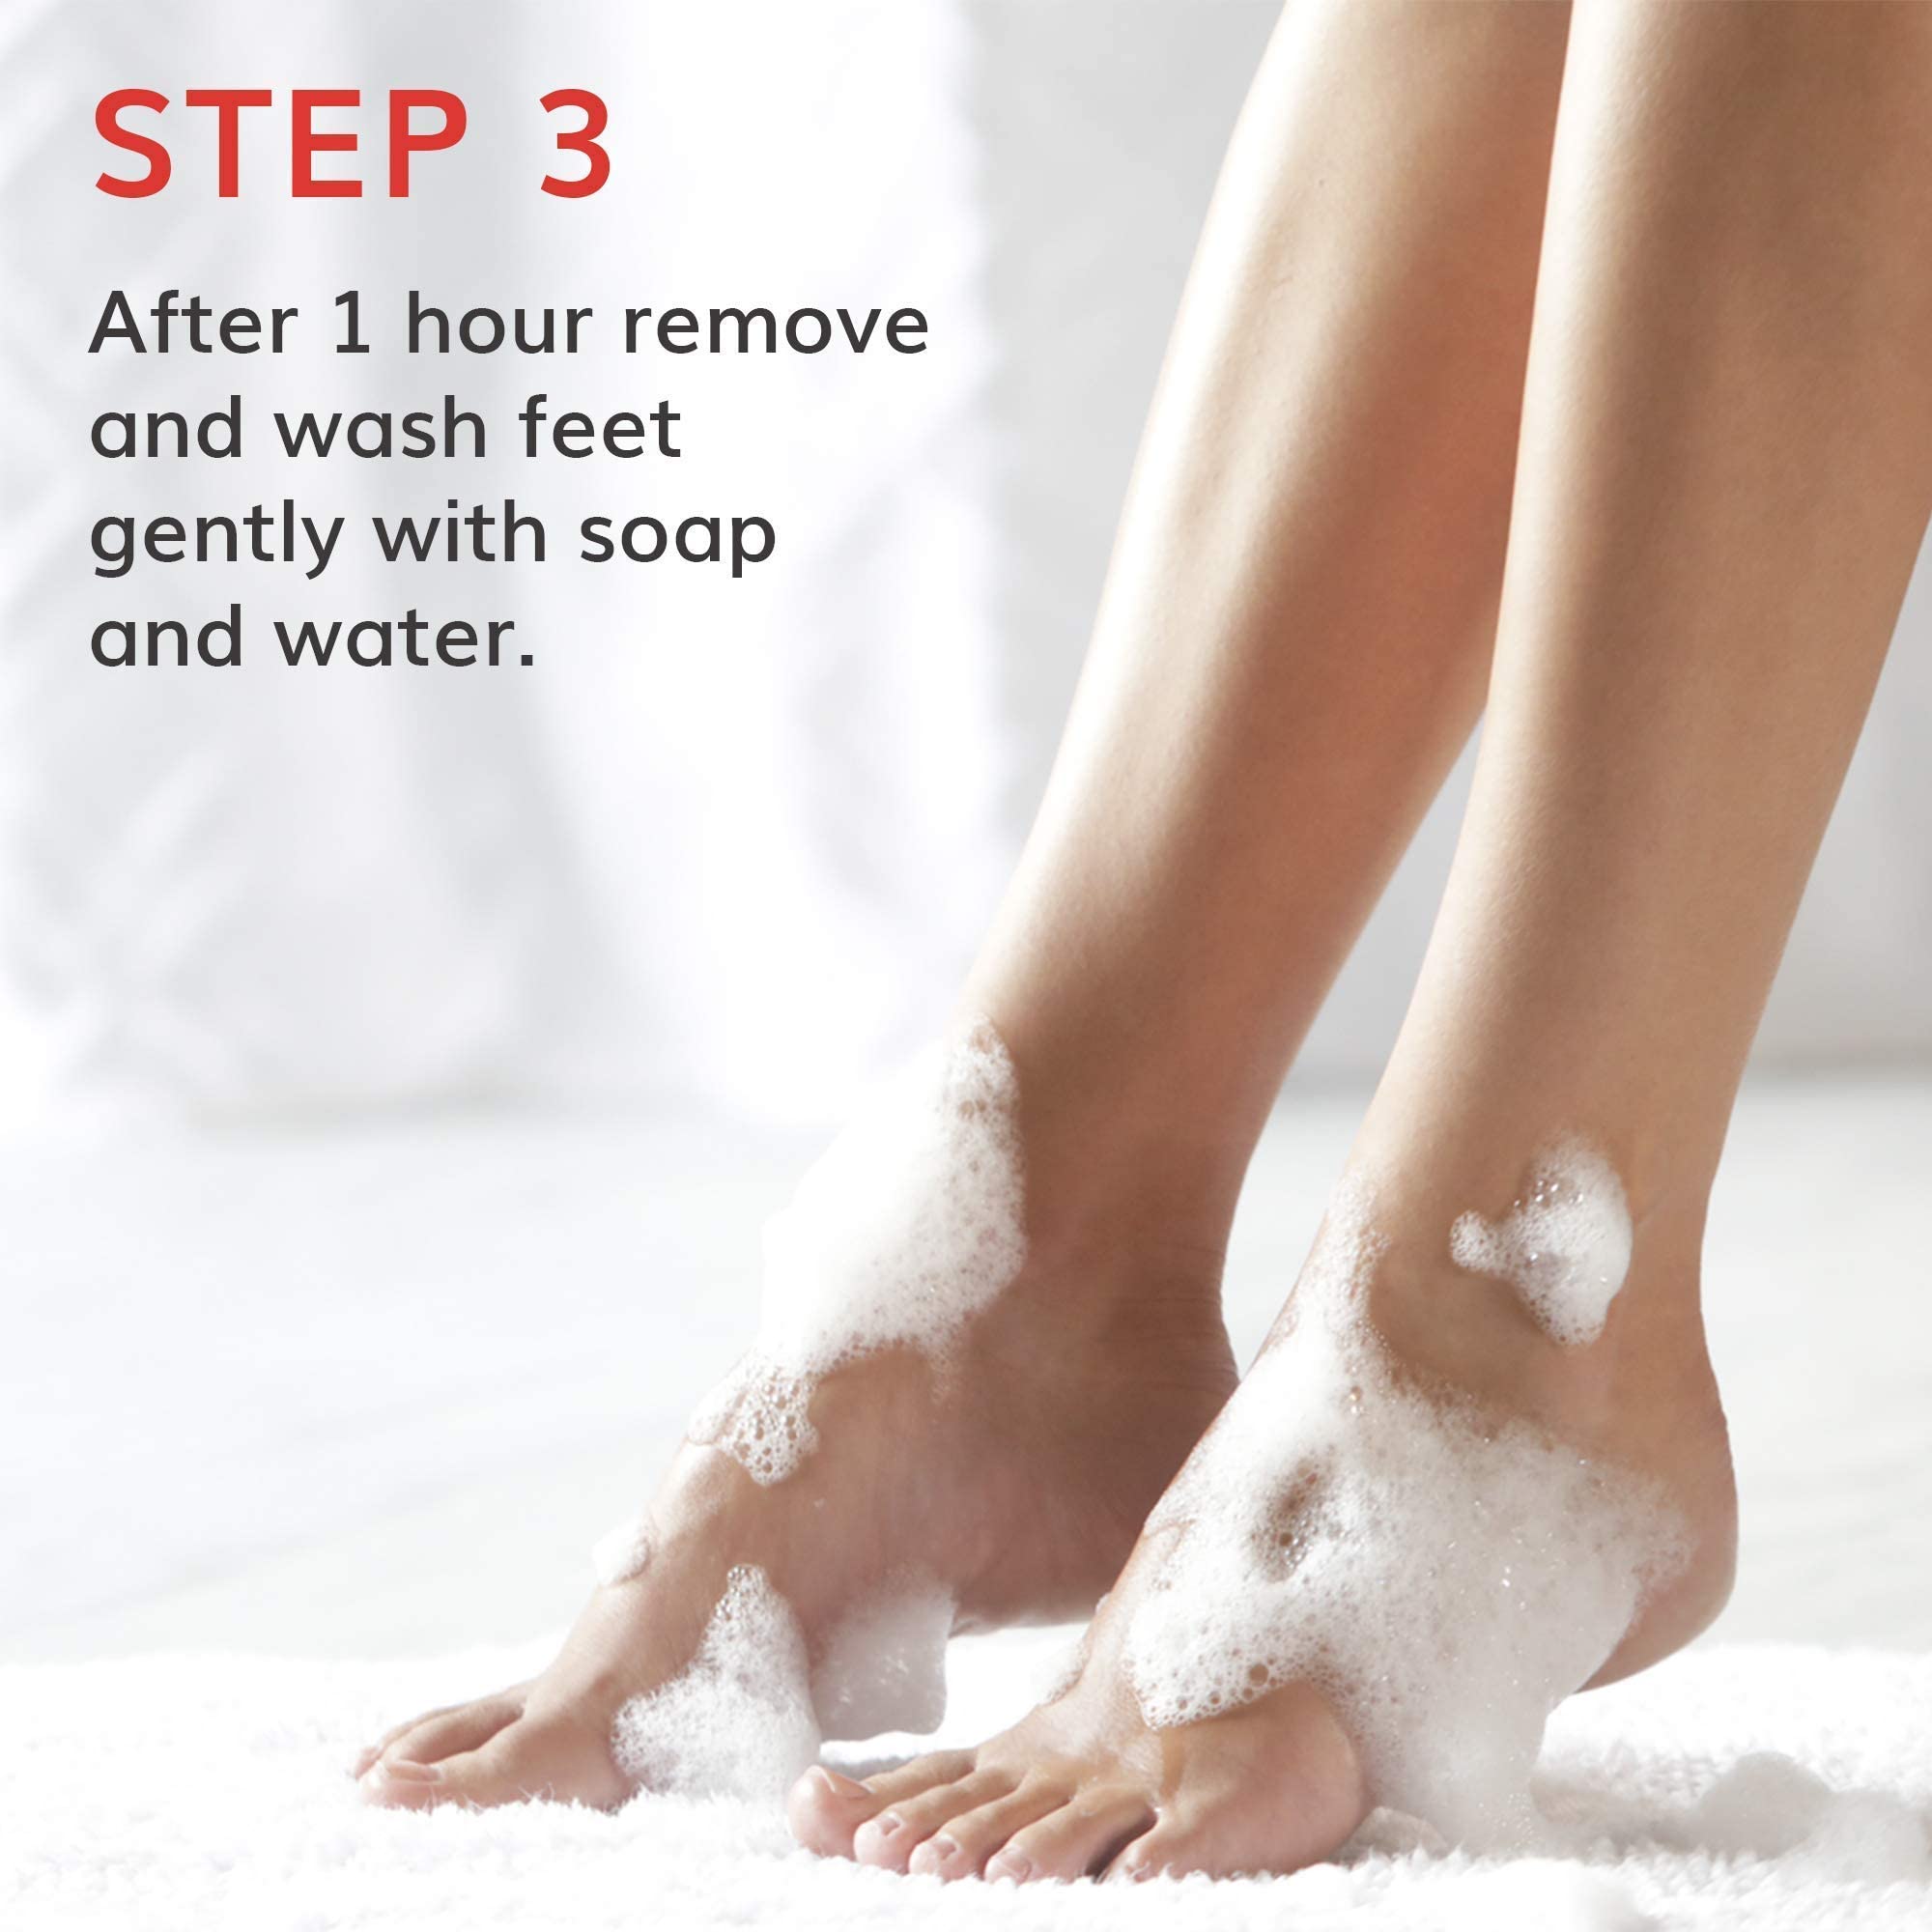 Baby Foot Peel Mask-Original Exfoliant Foot Peel-Callus Remover for Rough Cracked Dry Feet-Dead Skin Remove-Foot Peeling Mask for Baby Soft Feet